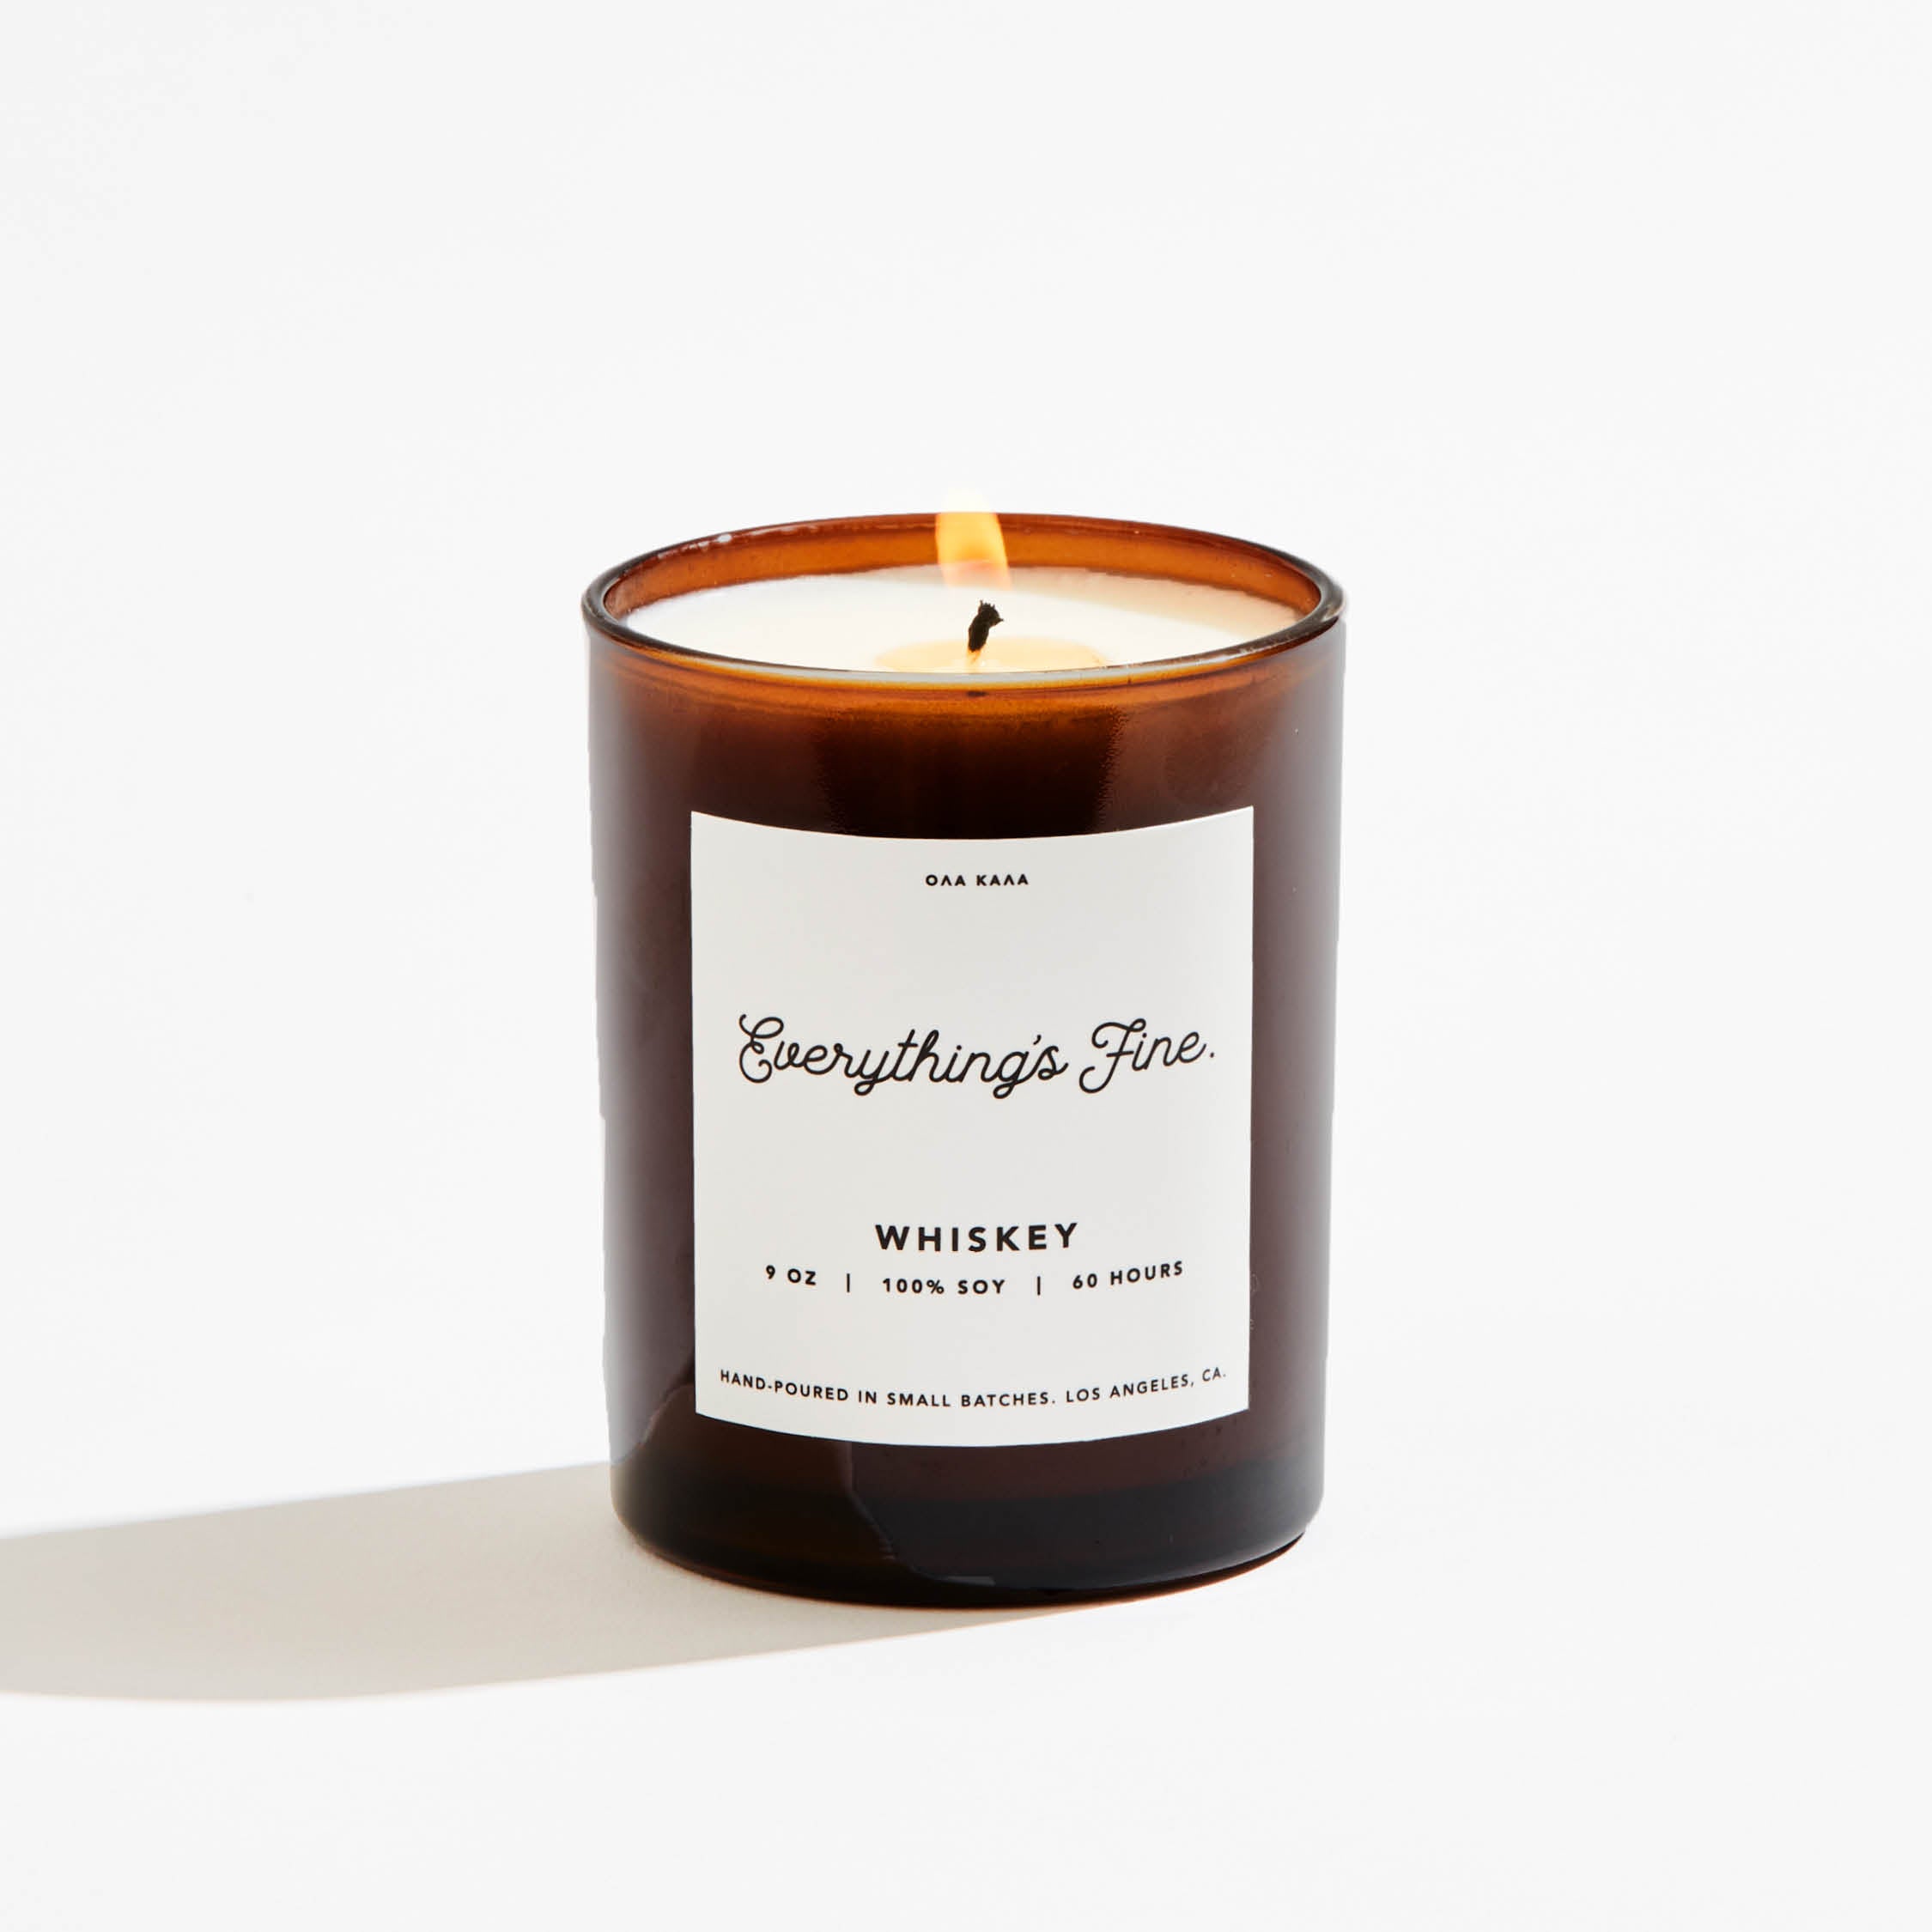 100% soy wax, hand-poured in ultra small batches in Los Angeles, CA. Made with a lead-free cotton wick and premium fragrance and essential oils for a clean burn. Whiskey, smoke, oak, tonka bean.